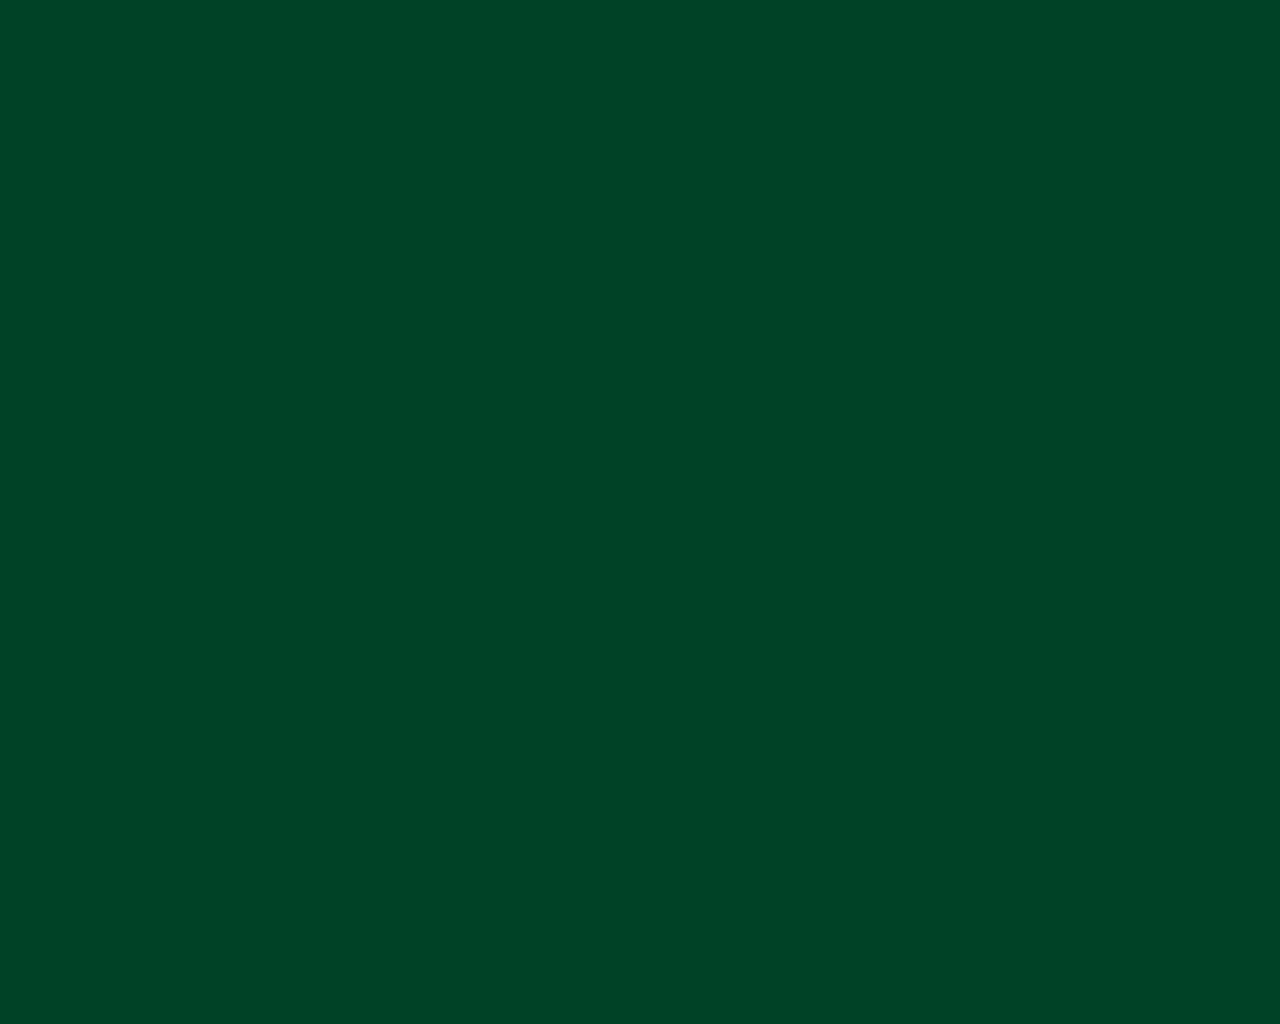 1280x1024 British Racing Green Solid Color Background